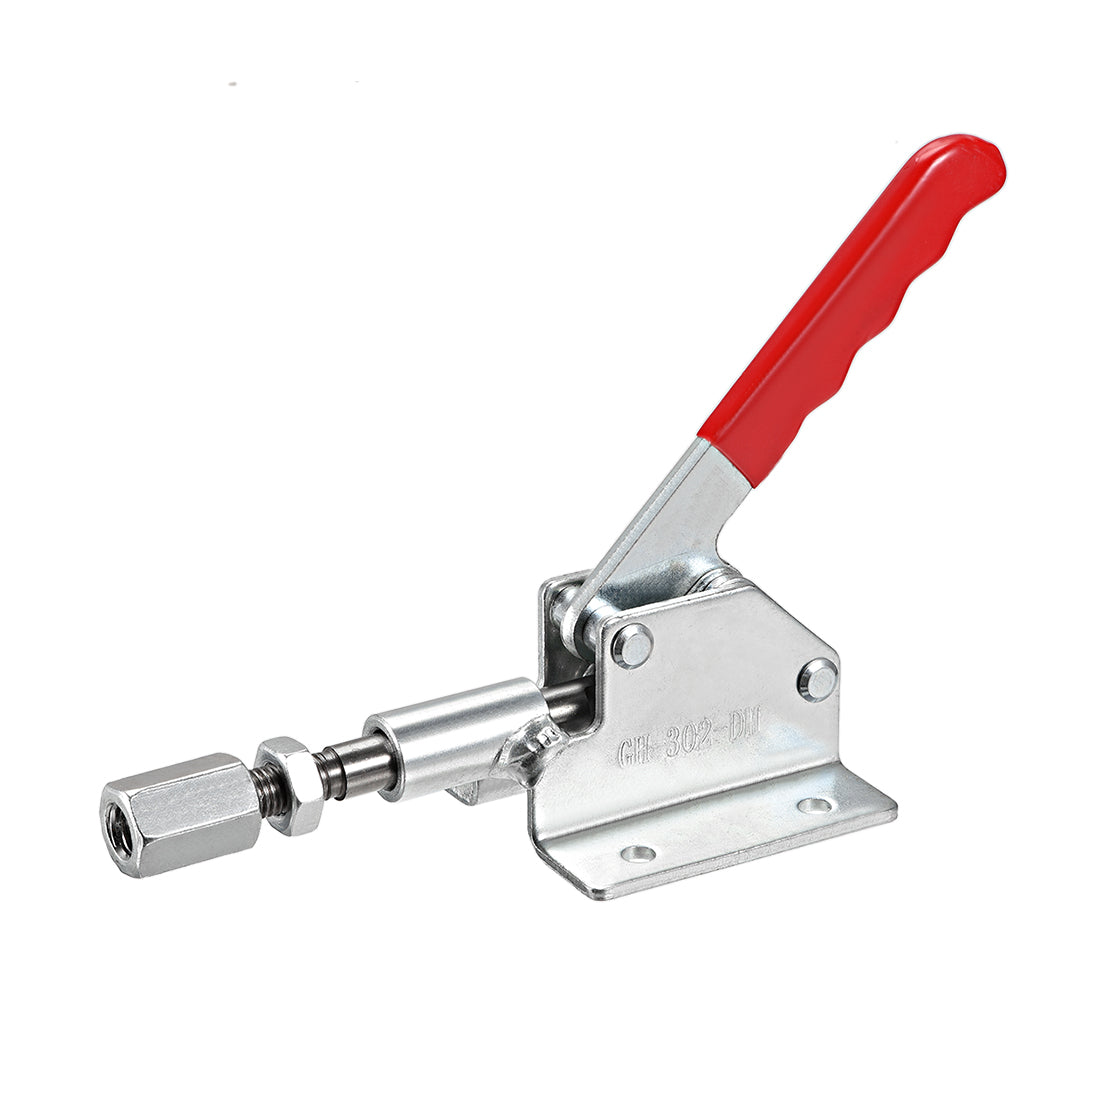 uxcell Uxcell Hand Tool Pull Push Action Toggle Clamp Quick Release Clamp 370 lbs/170kg Holding Capacity 12mm Stroke